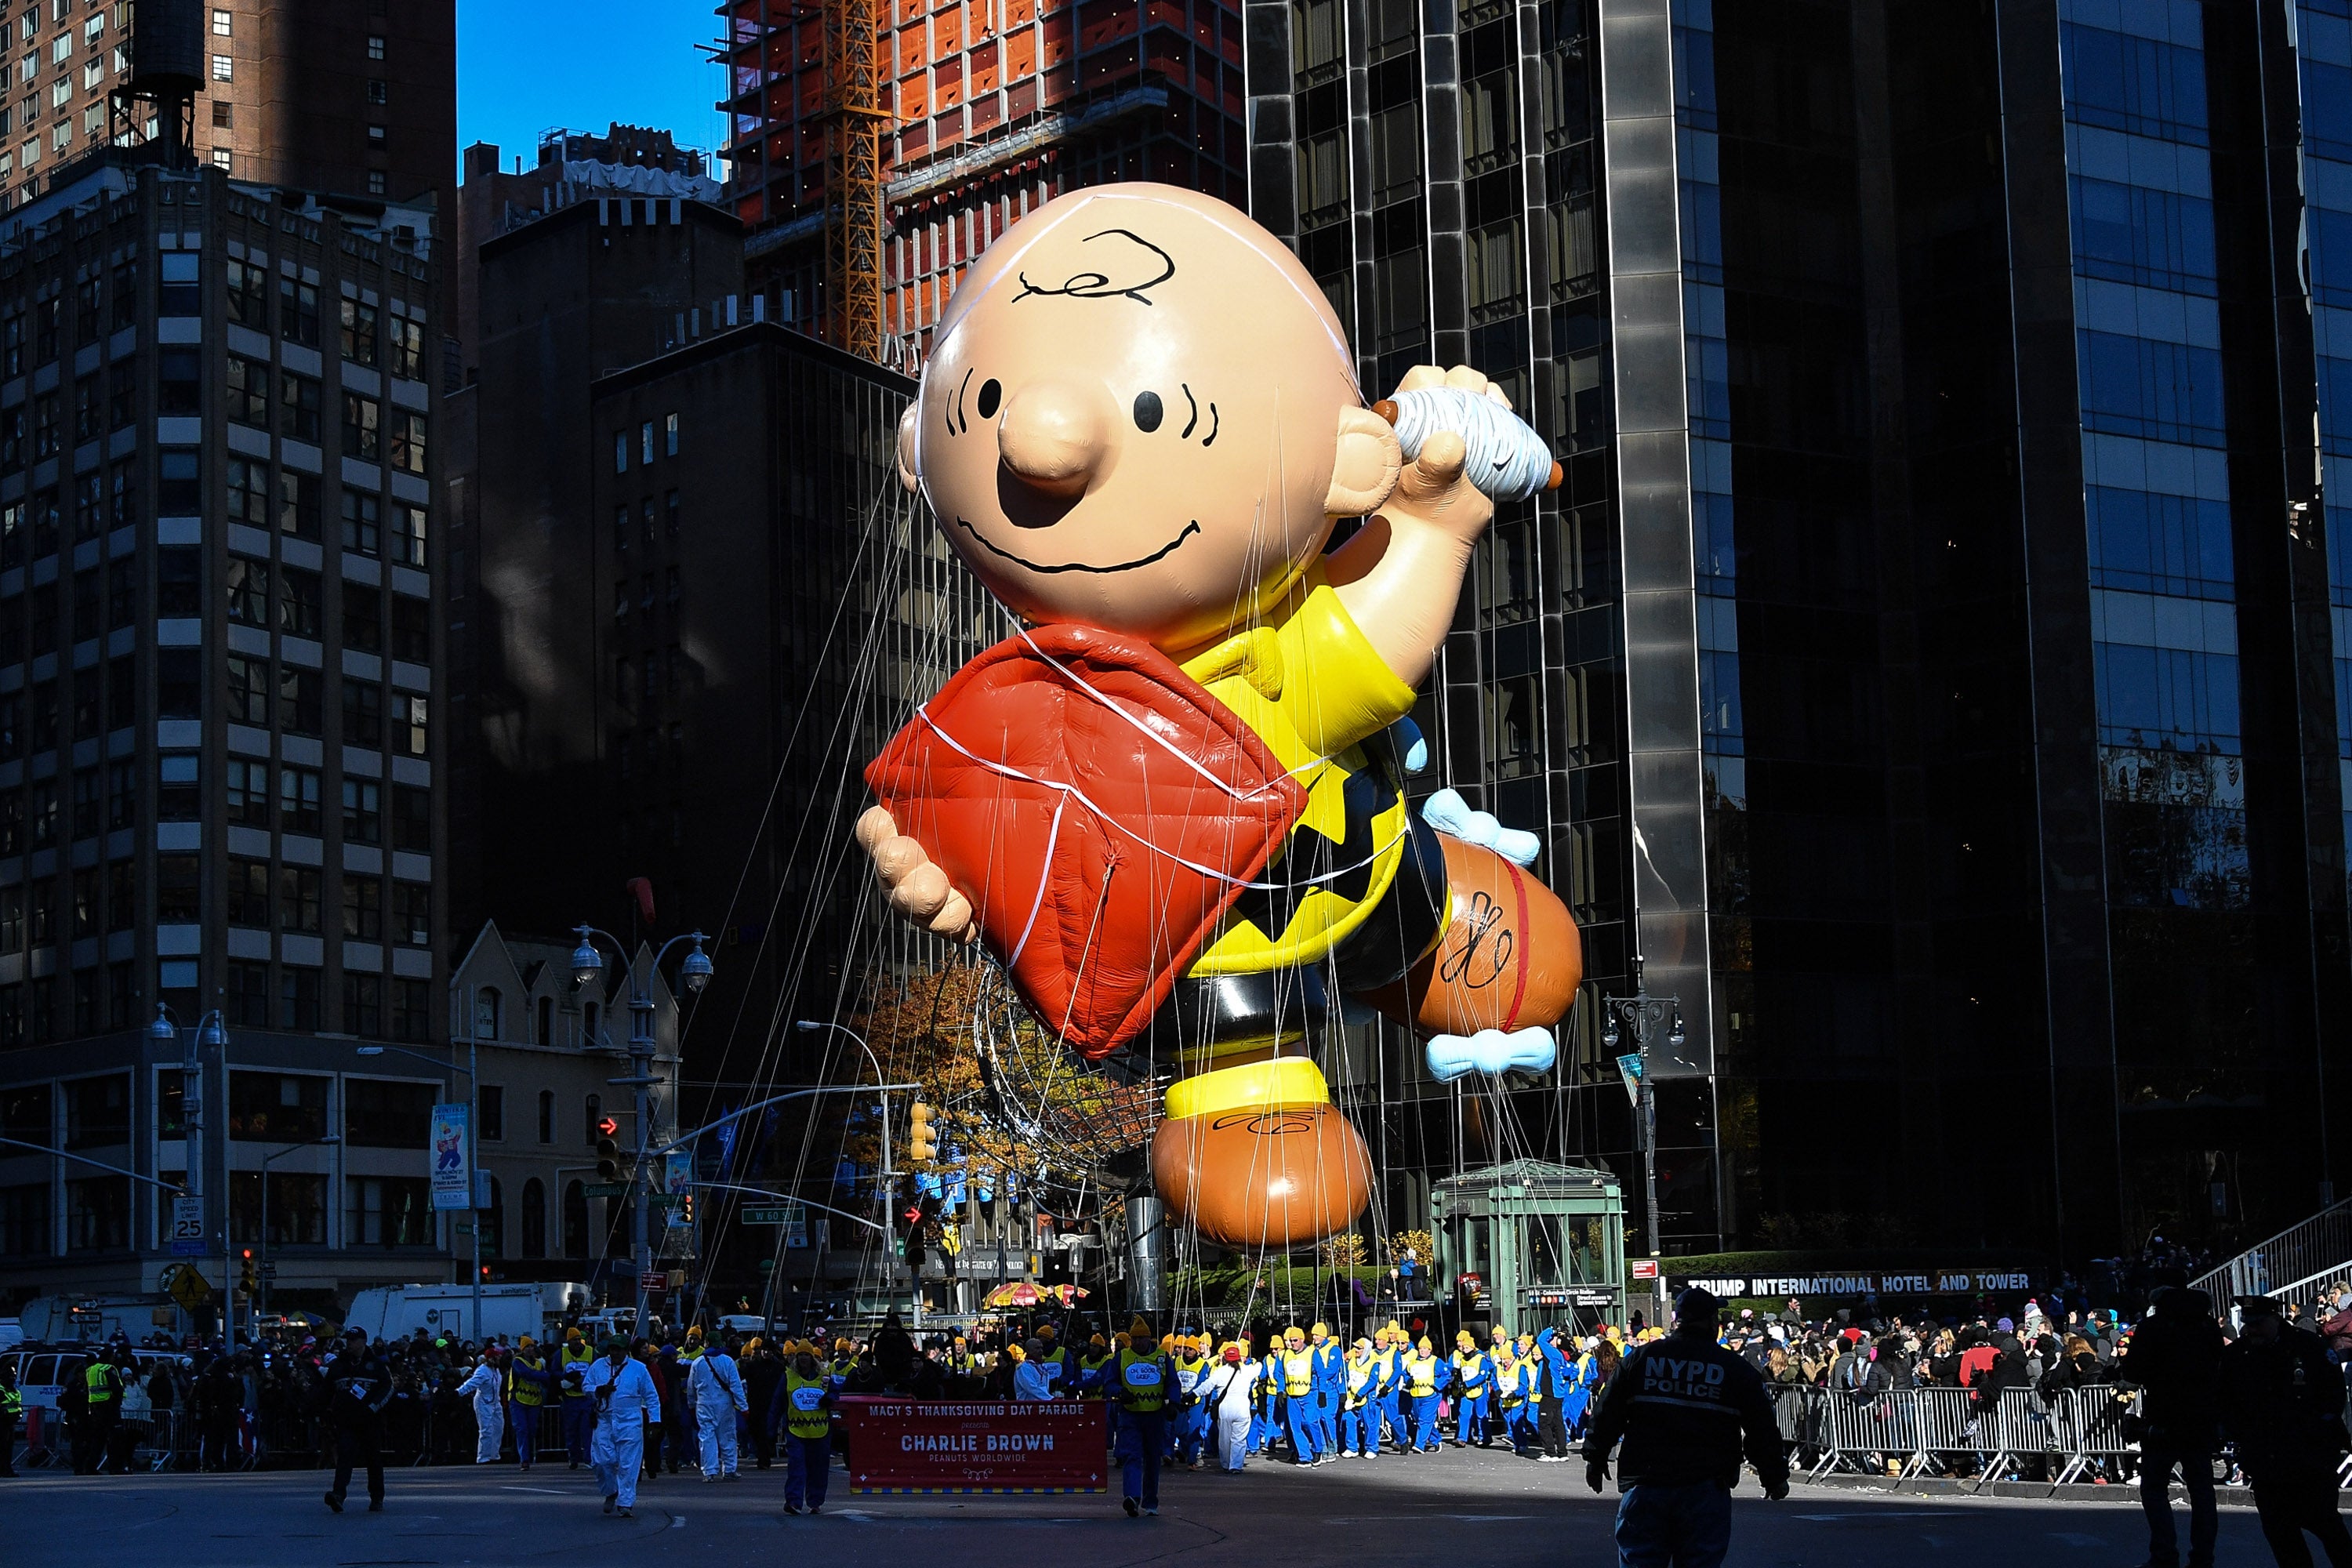 <p> The Charlie Brown balloon floats in Columbus Circle during the 91st Annual Macy’s Thanksgiving Day Parade in 2017</p>